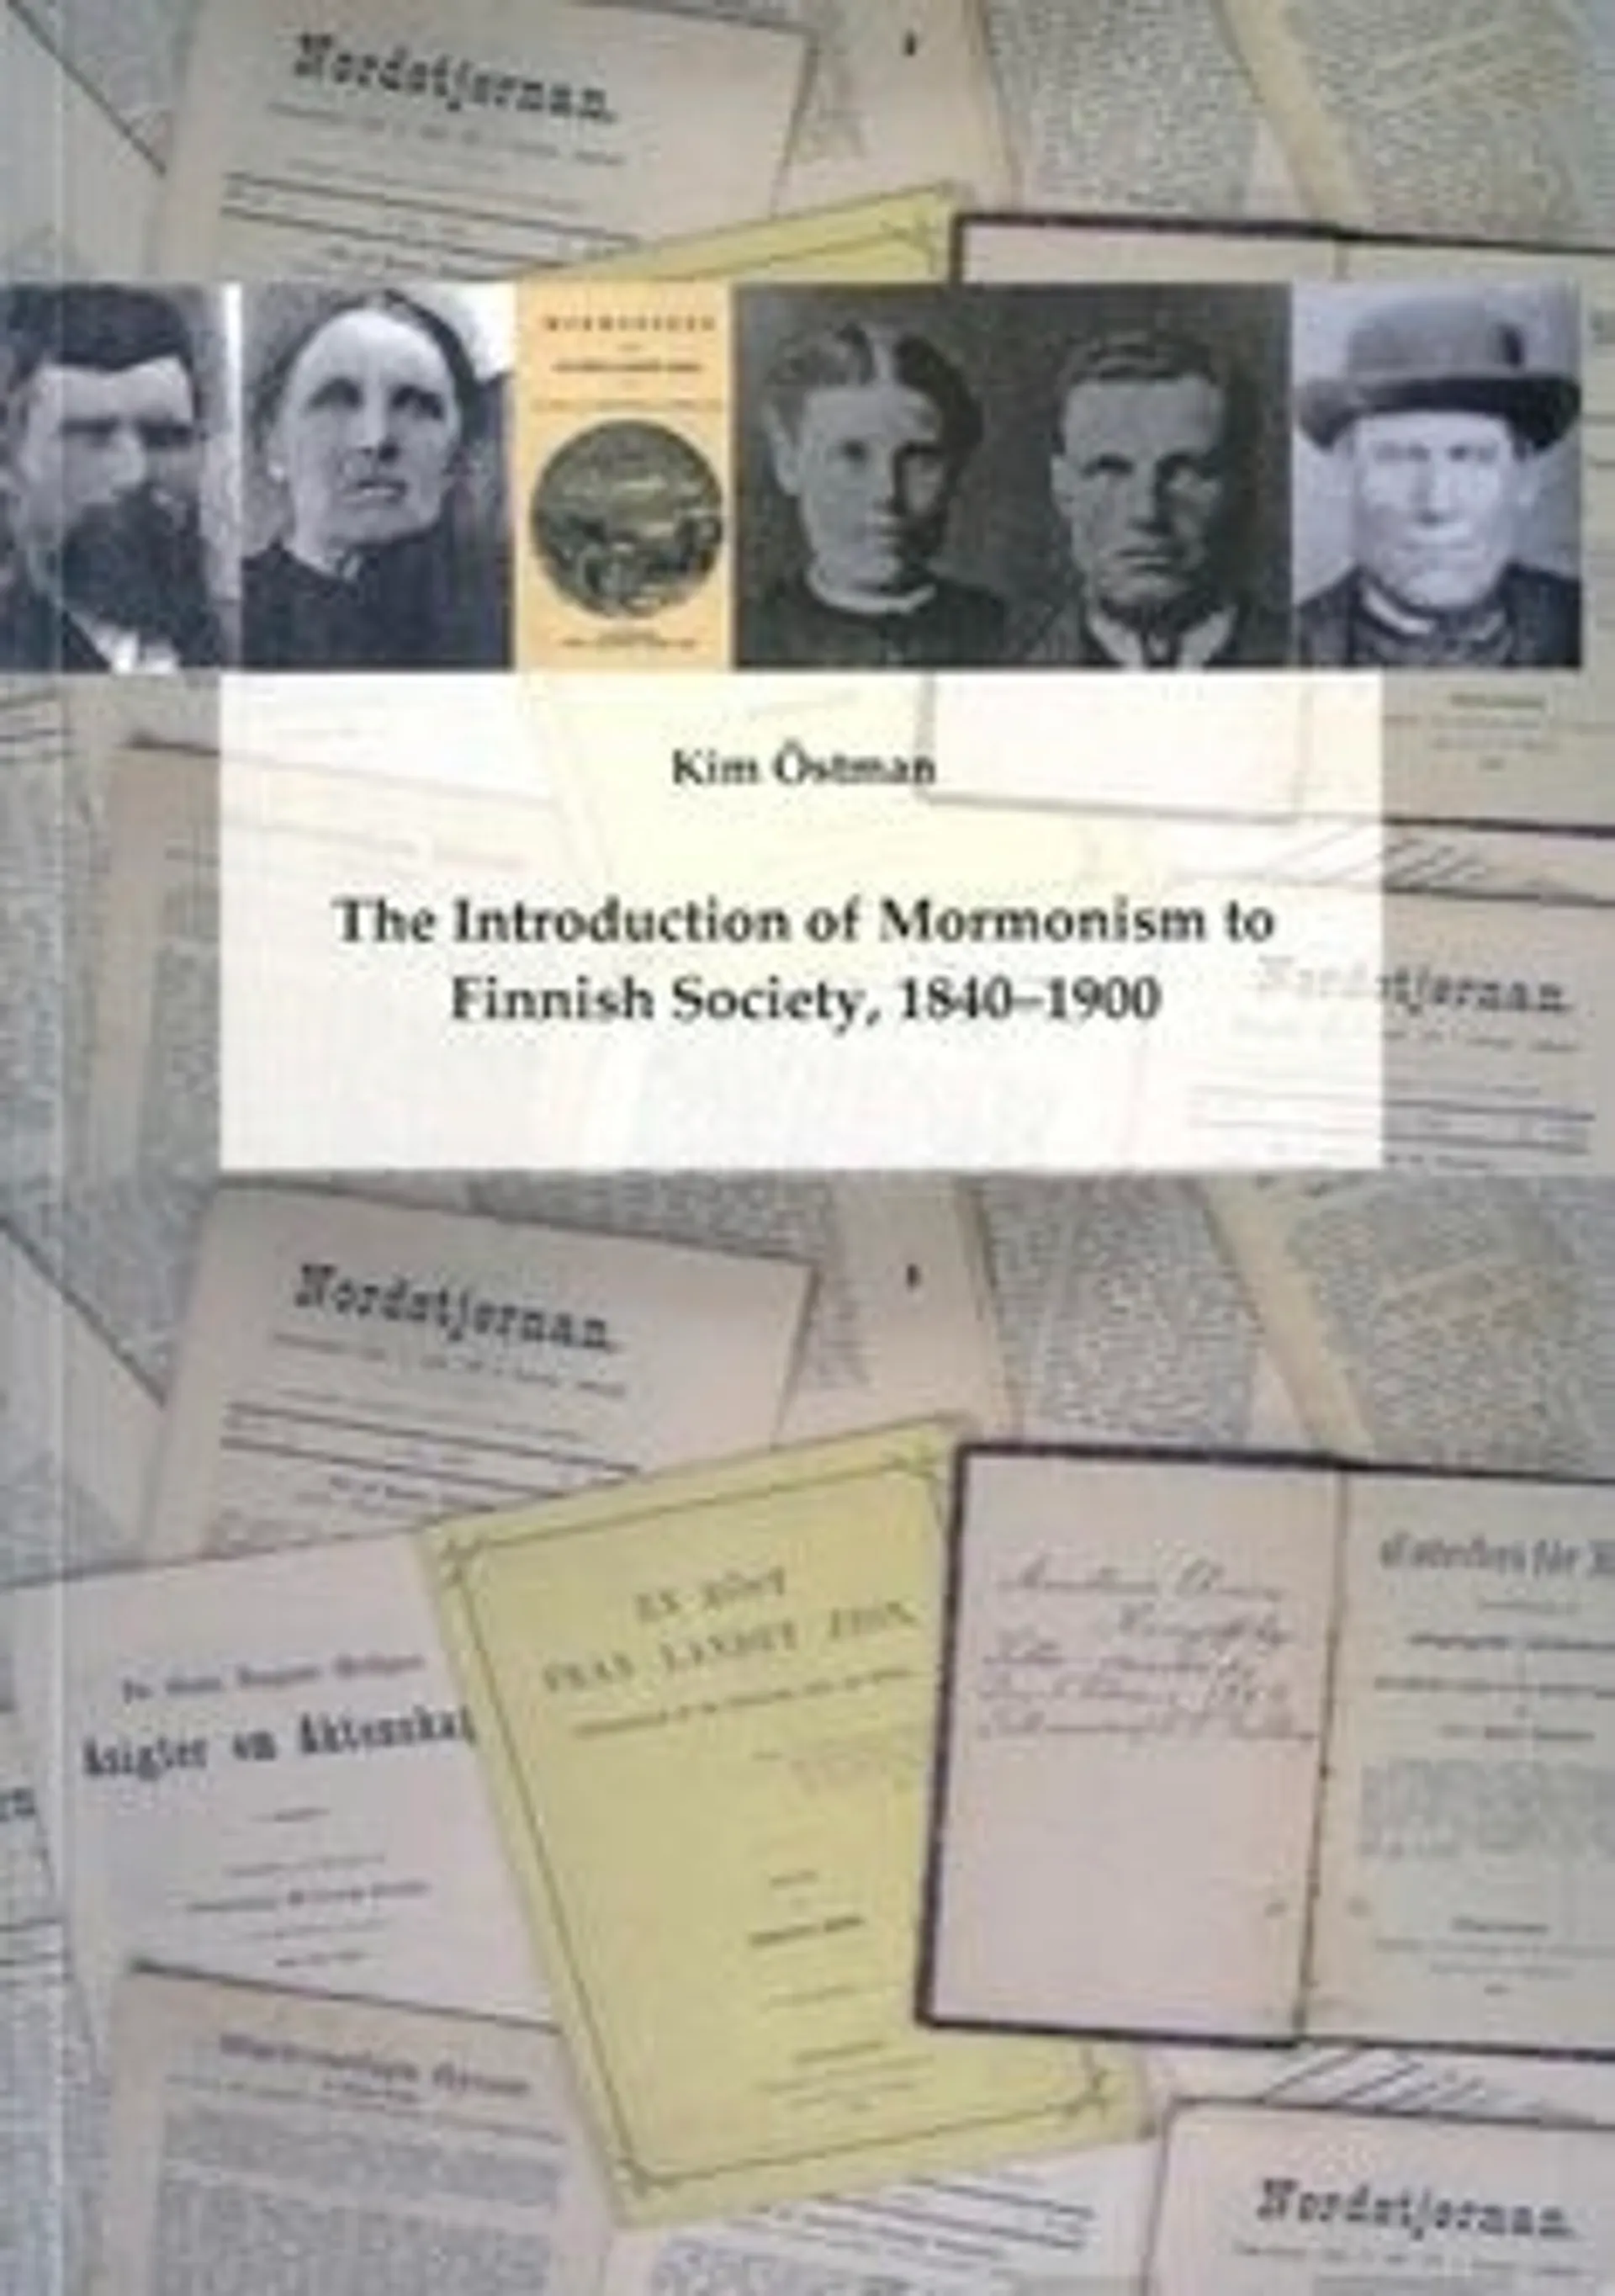 Östman, The Introduction of Mormonism to Finnish Society, 1840-1900